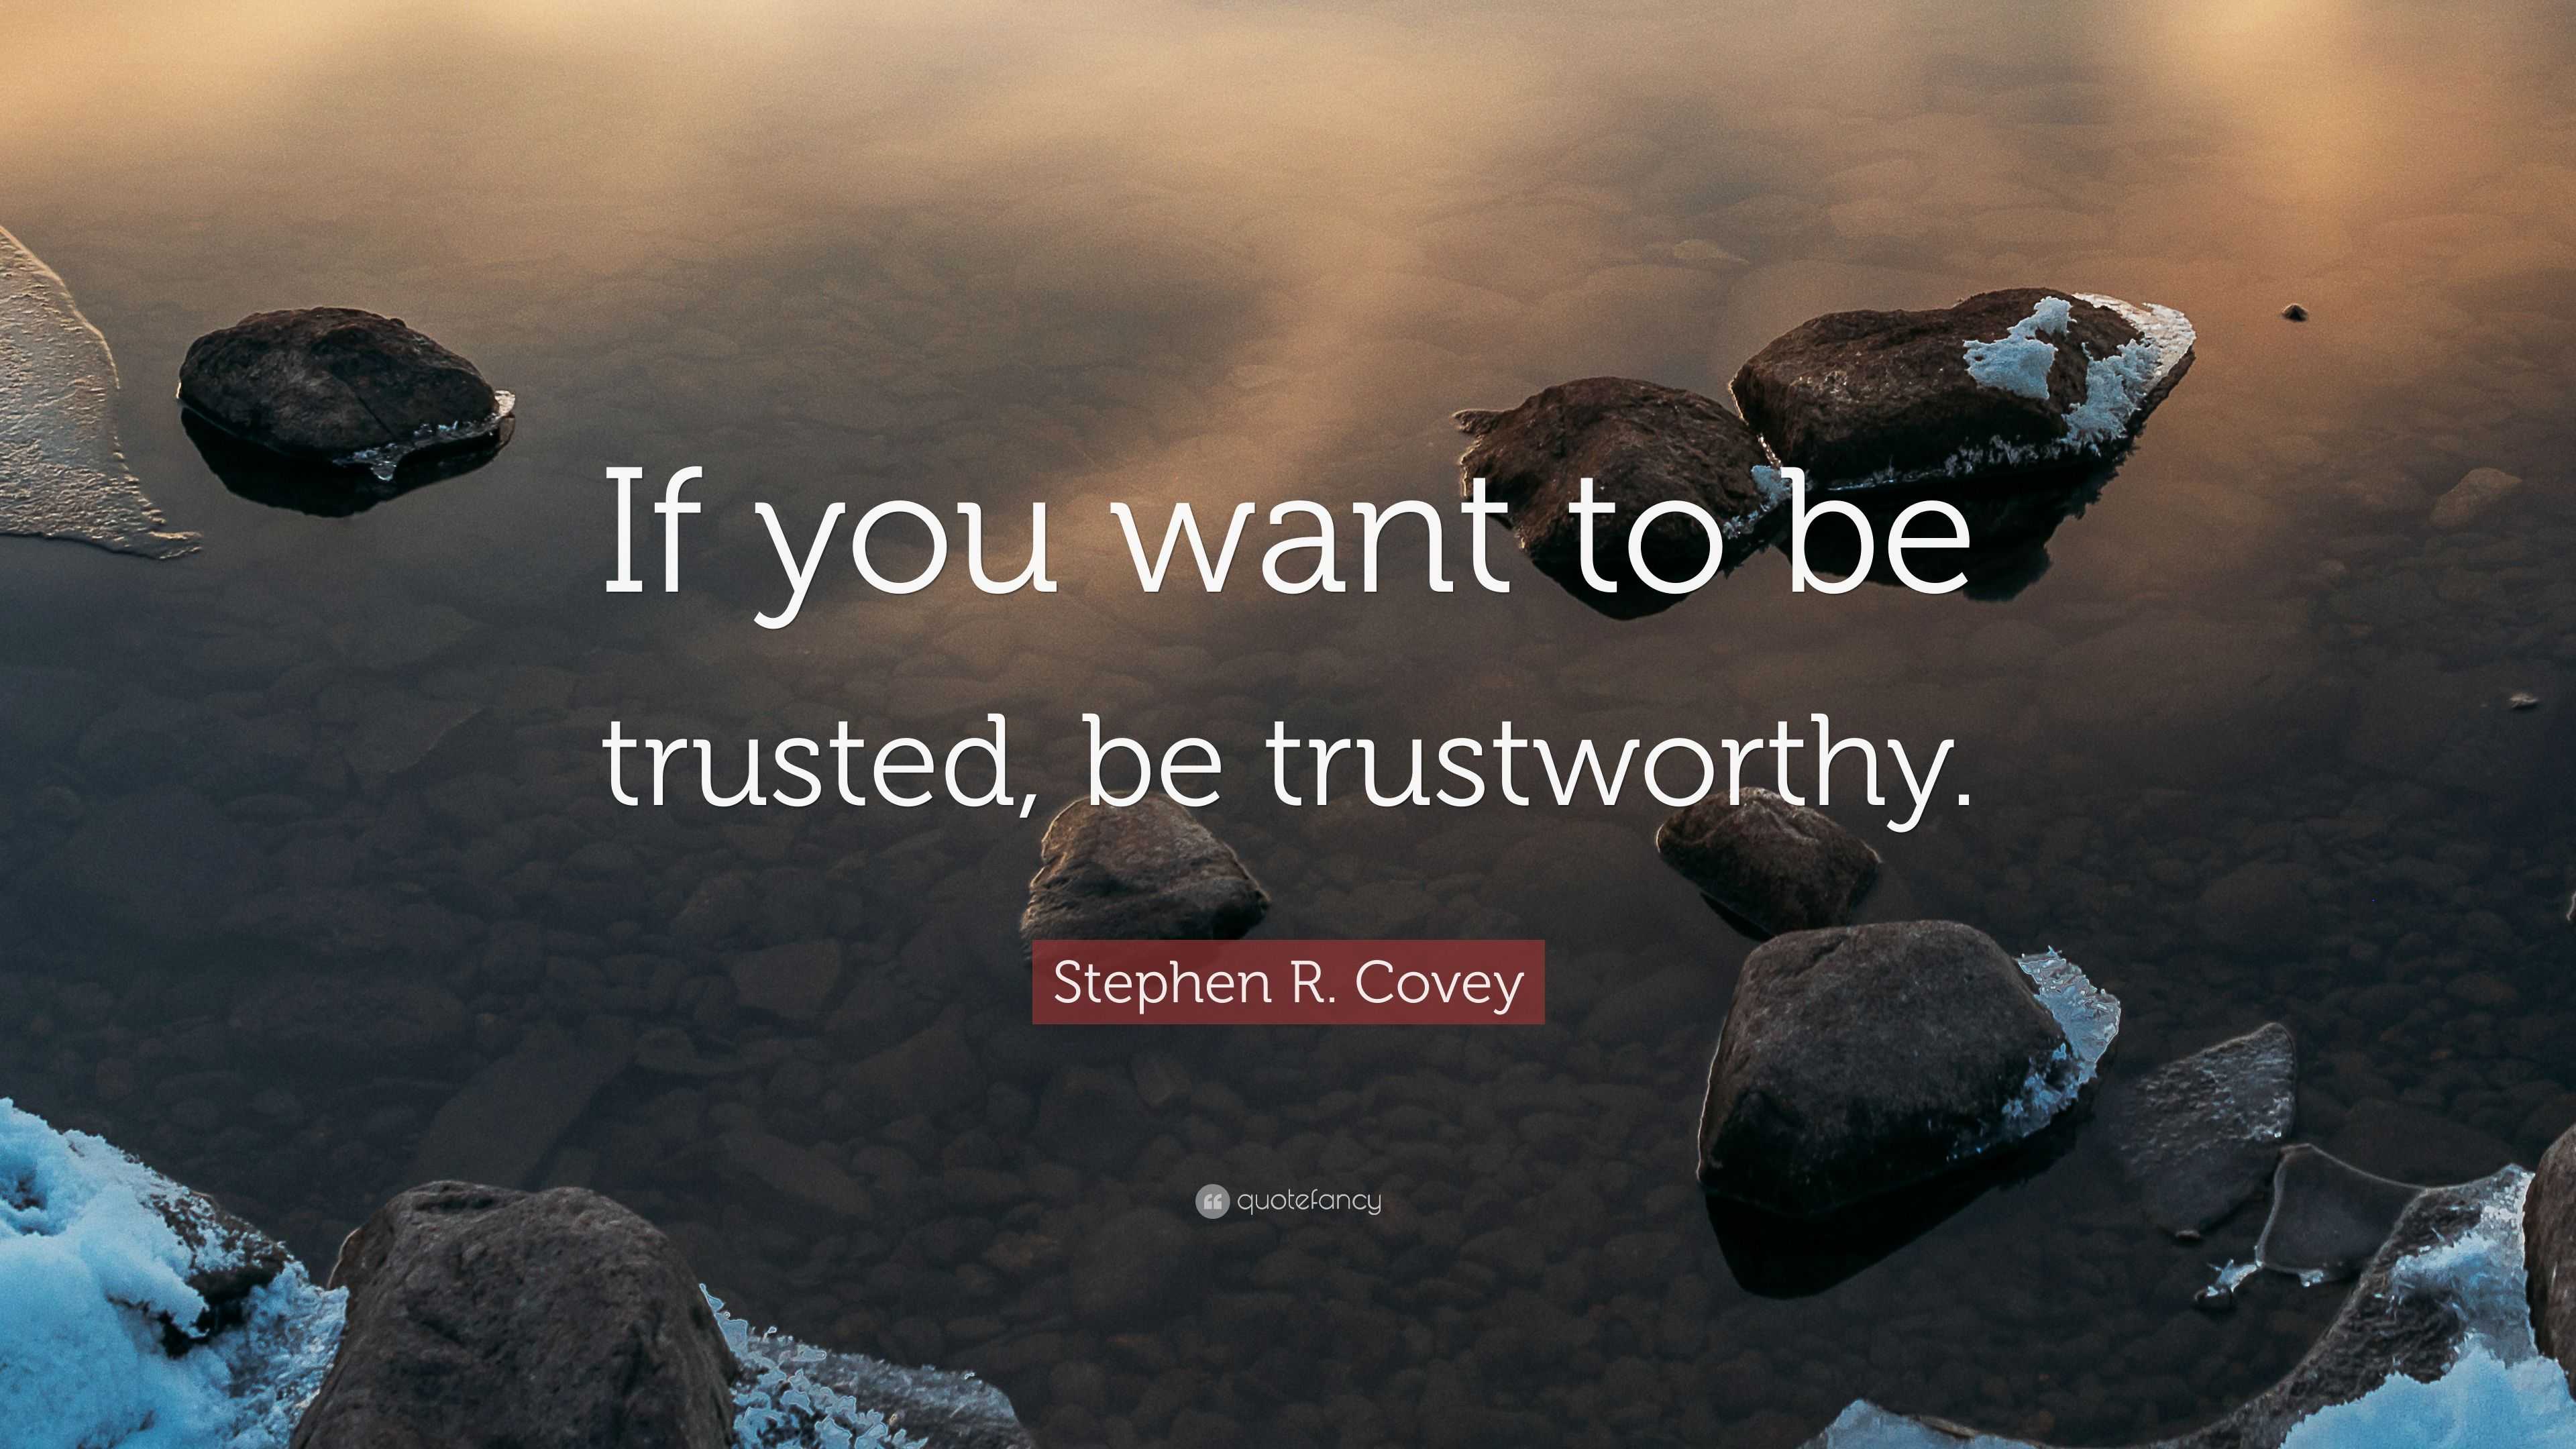 Stephen R Covey Quote “if You Want To Be Trusted Be Trustworthy ”